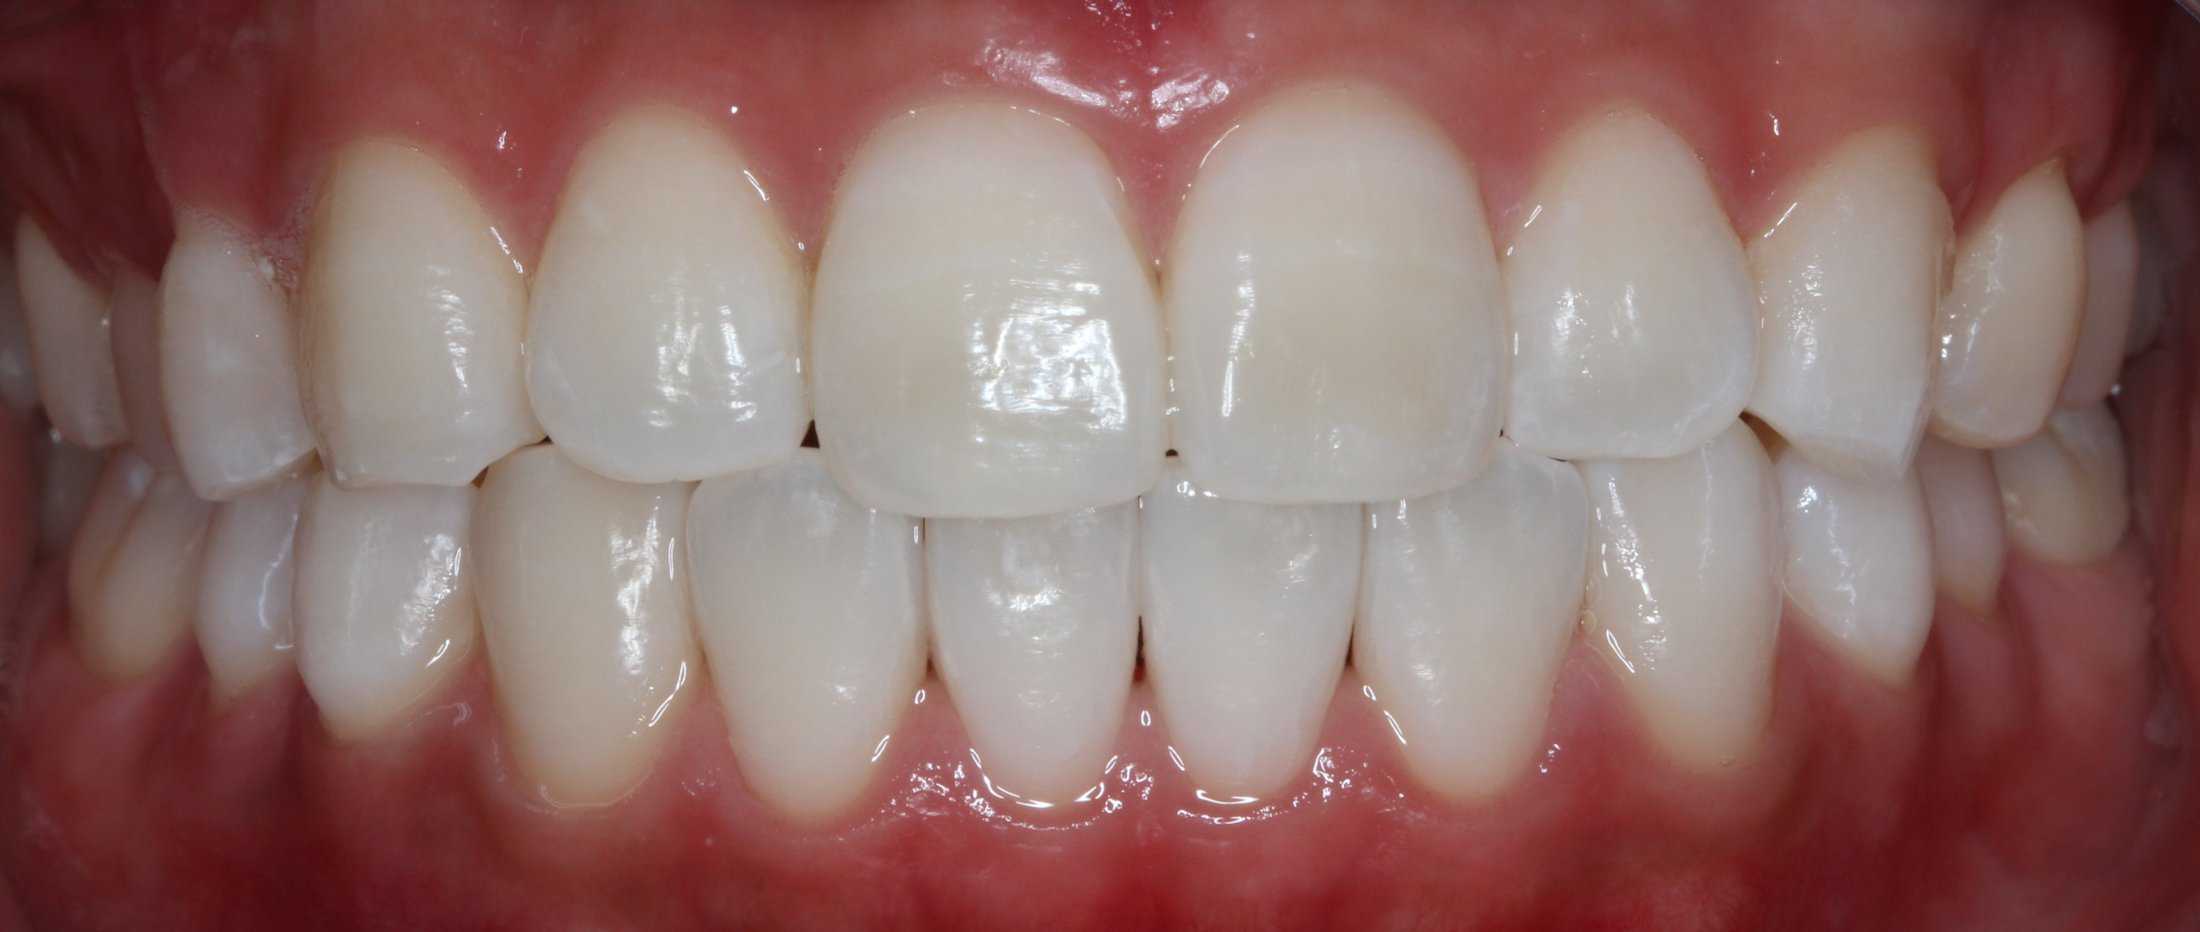 Patient's mouth after teeth whitening